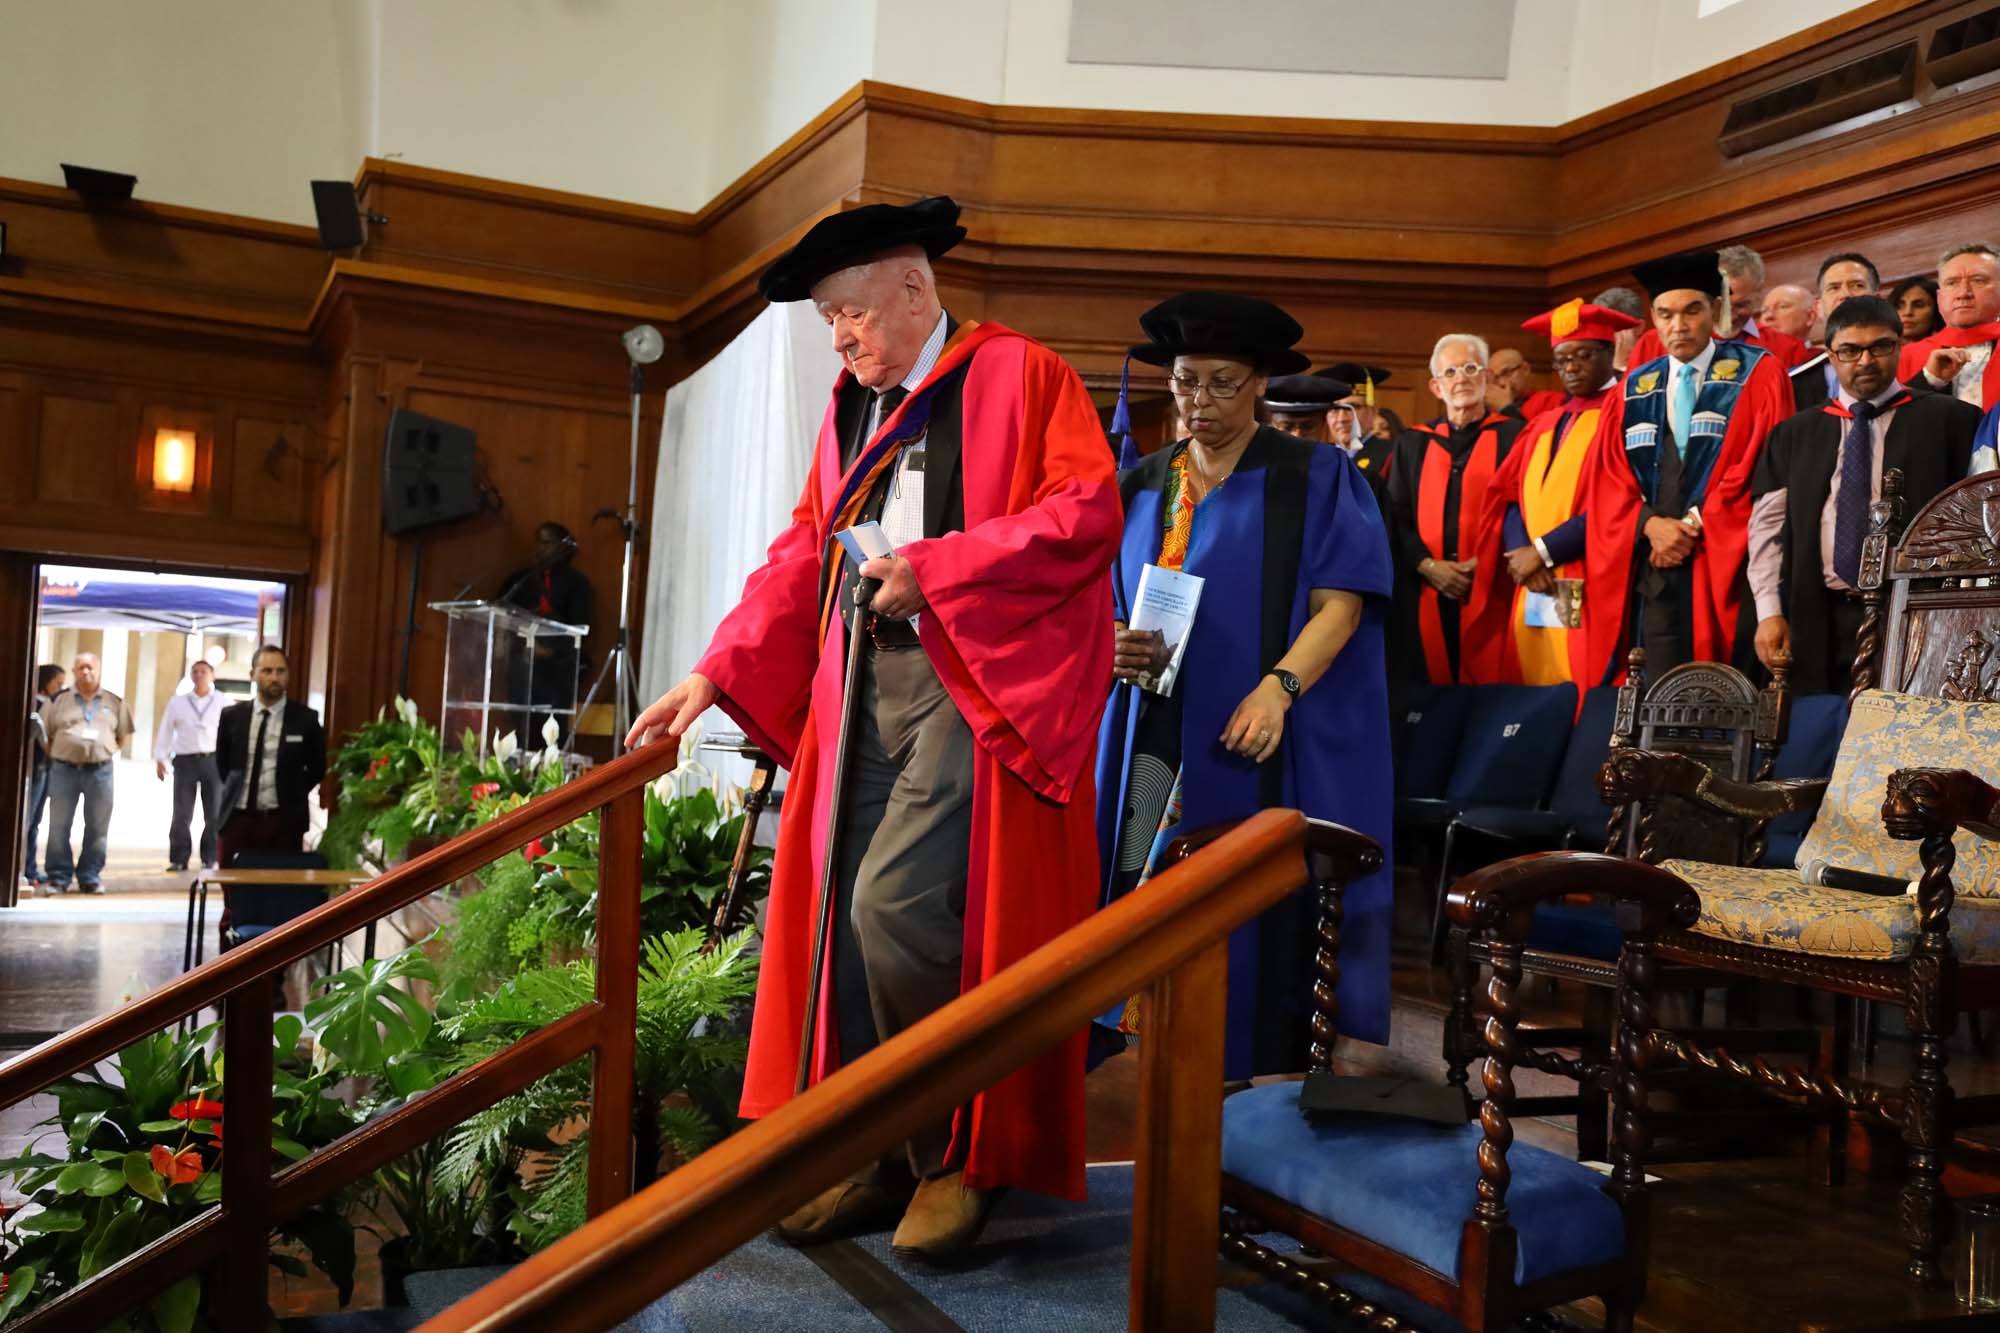 At the robing ceremony of Professor Mamokgethi Phakeng, the new vice-chancellor of the University of Cape Town, in December 2018.